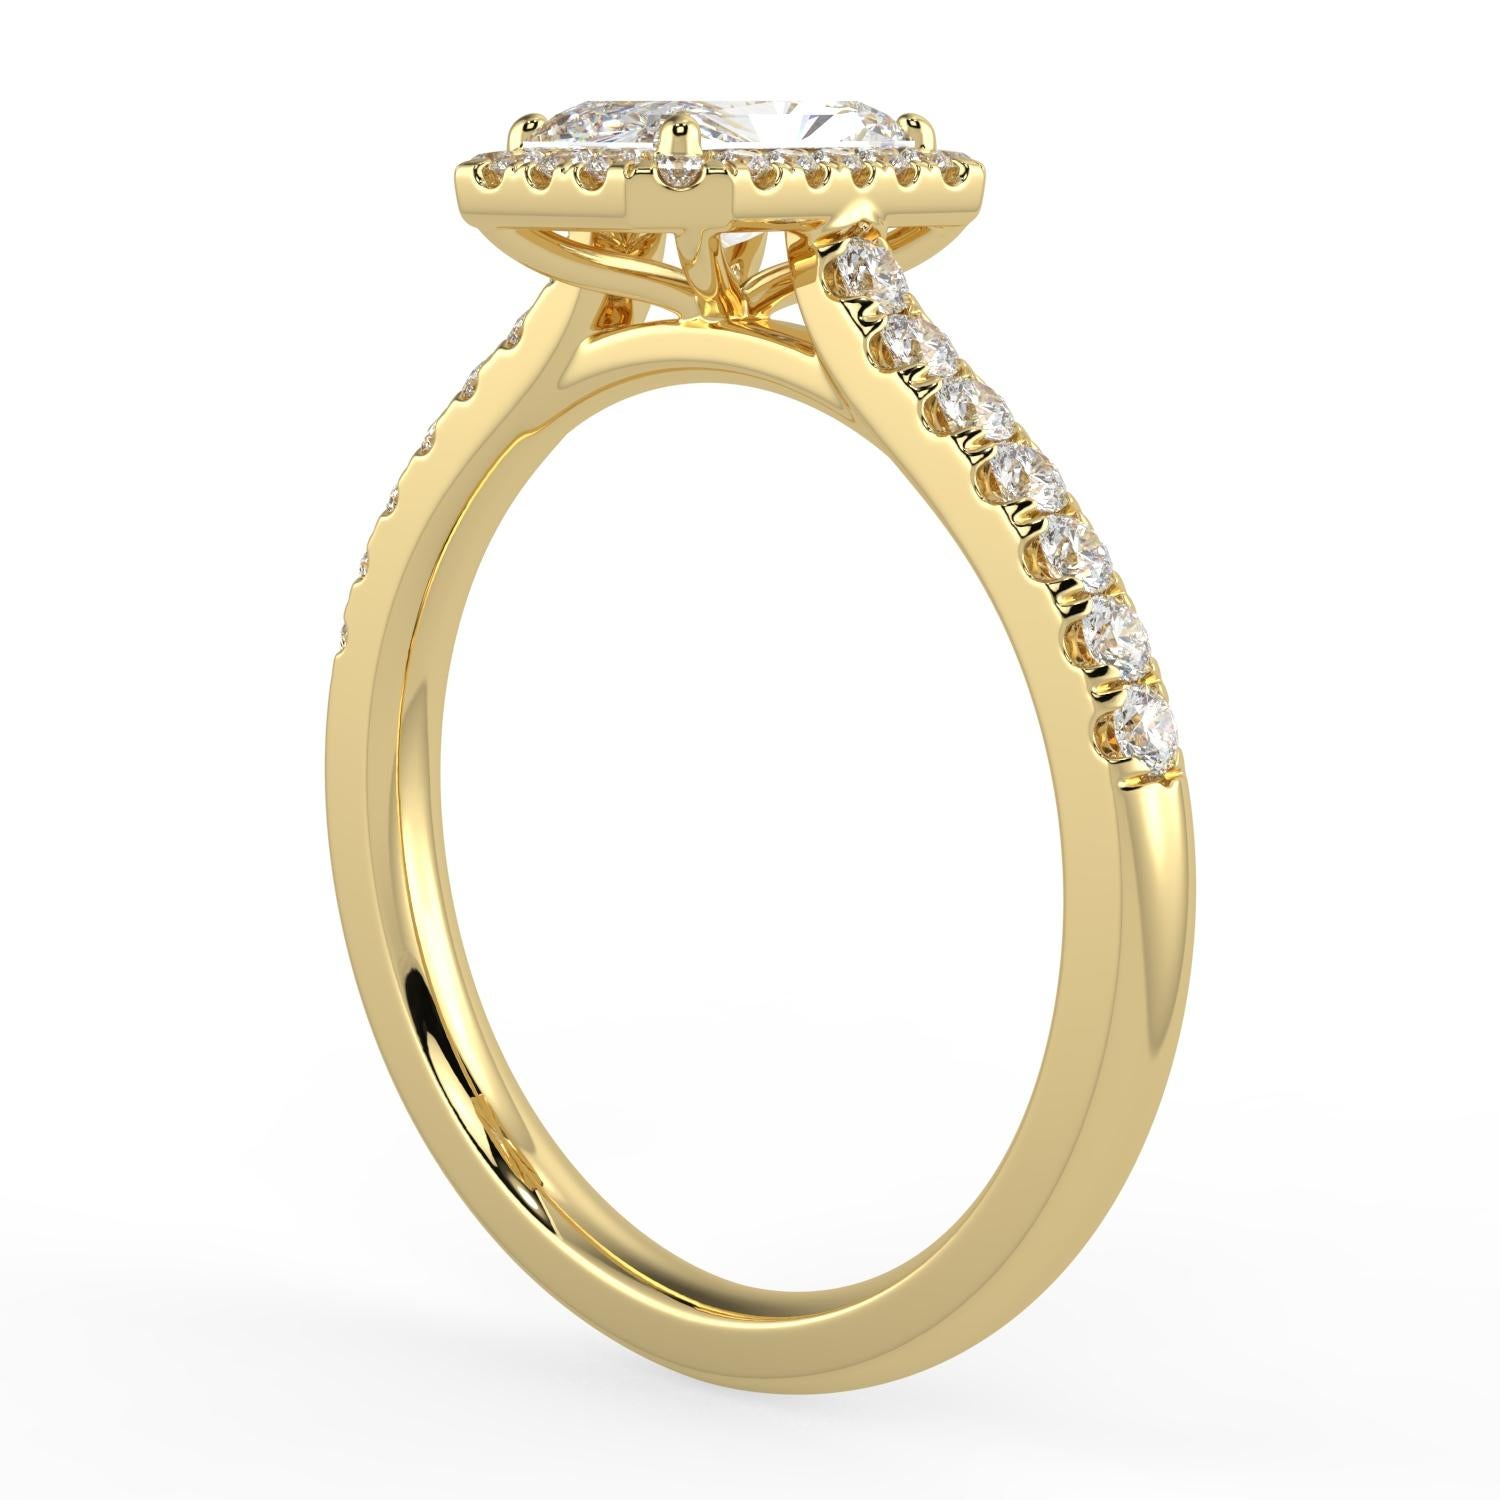 AAMIAA DIAMOND RING
1ct Natural Diamond G-H Color SI Clarity Perfect Design Shape Halo Fashion Stunning Promise Ring 14K Yellow  Gold
Specification:
Brand: Aamiaa
Metal: Yellow Gold
Metal Purity: 14k
Center Diamond Shape: Radiant
Design: Halo
Center